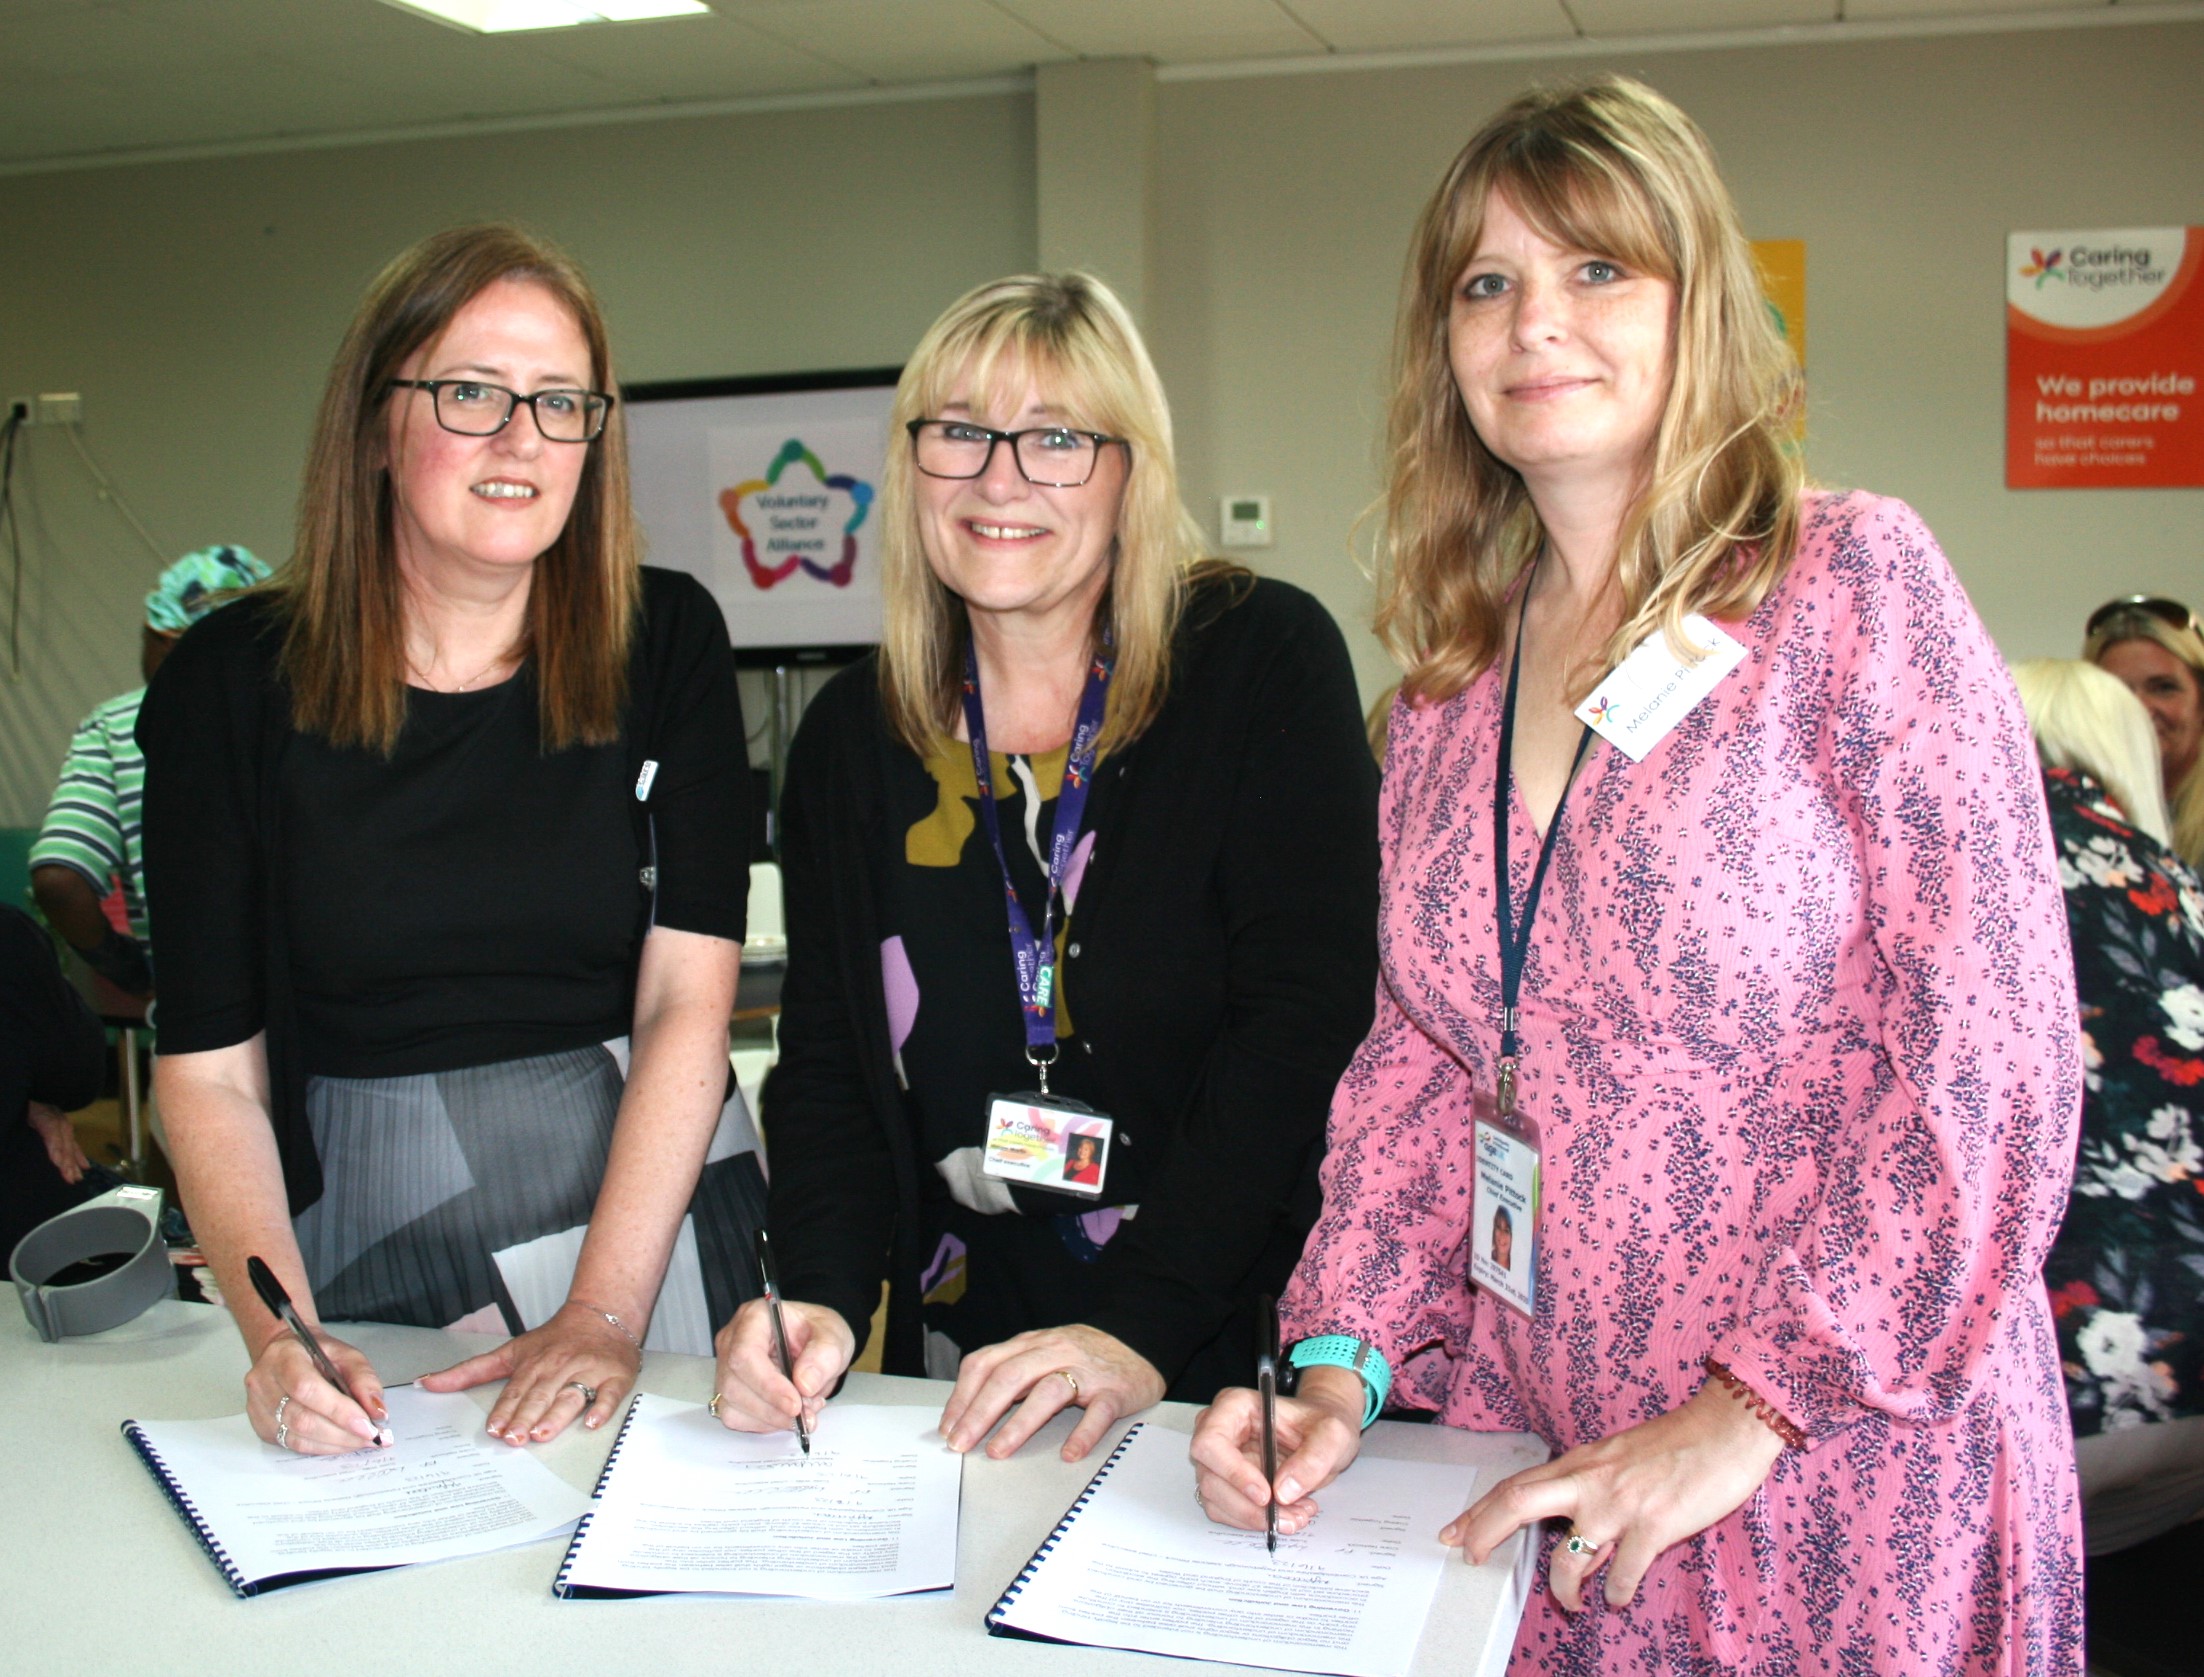 Group photo of MOU signing - Lynette Hurren – Voluntary Sector Alliance programme director, Care Network Cambridgeshire, Miriam Martin - Chief Executive, Caring Together, Melanie Pittock - Chief Executive of Age UK Cambridgeshire & Peterborough